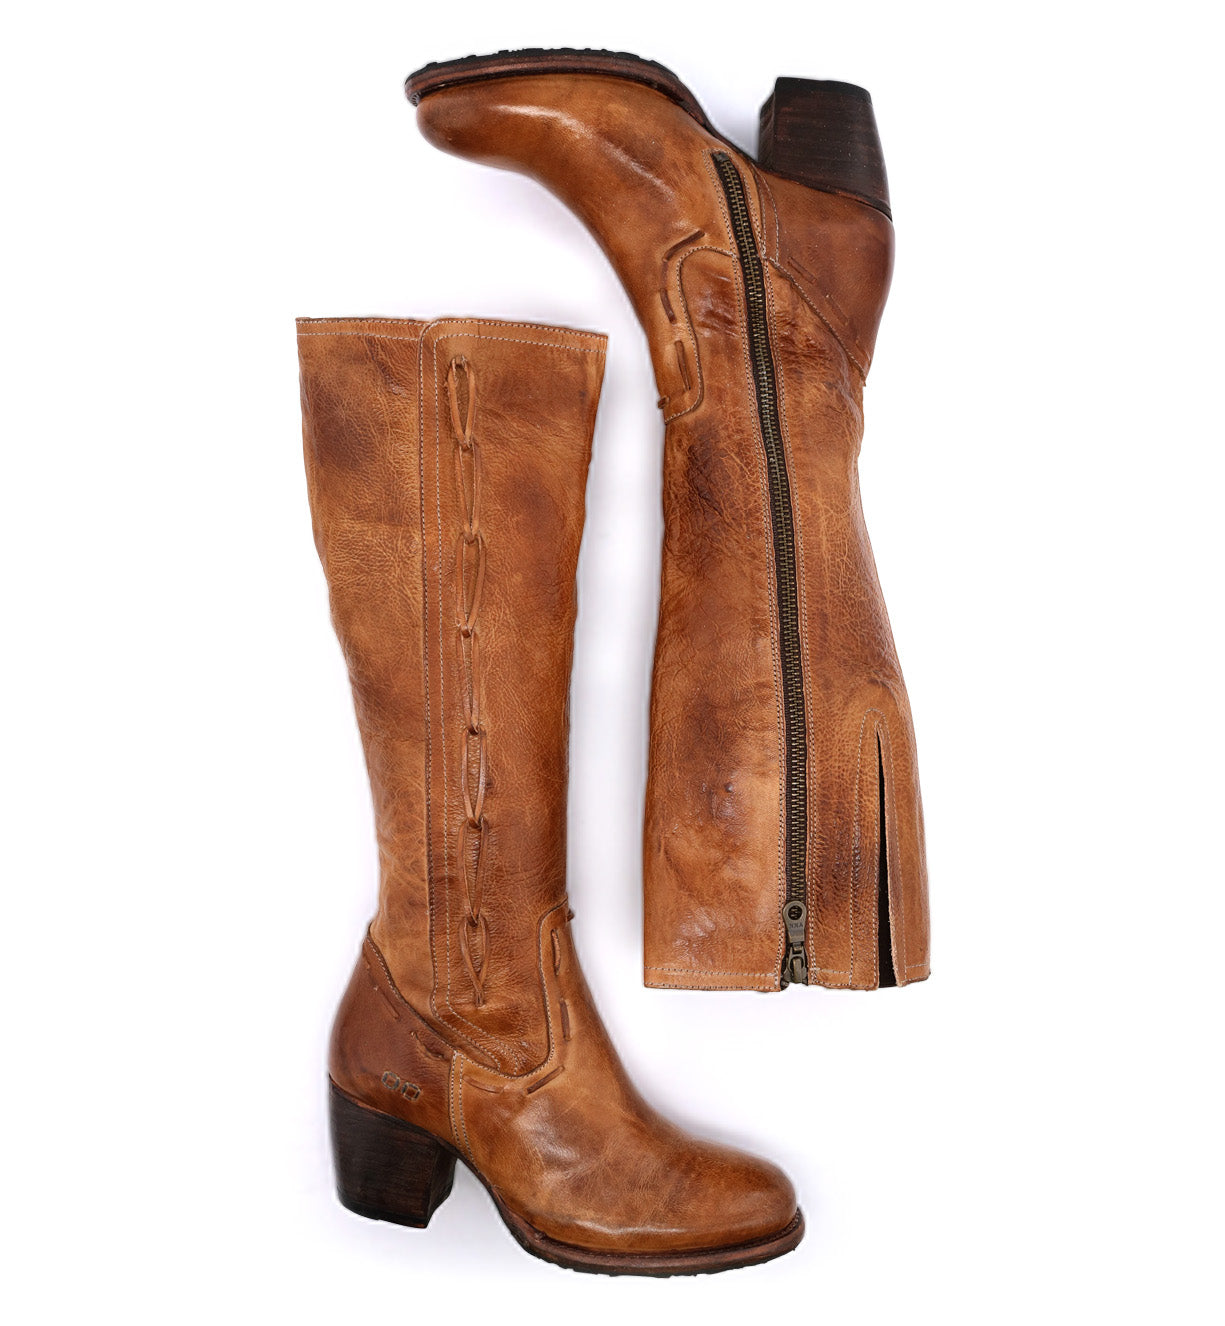 A pair of Bed Stu Fate boots with a zipper on the side.